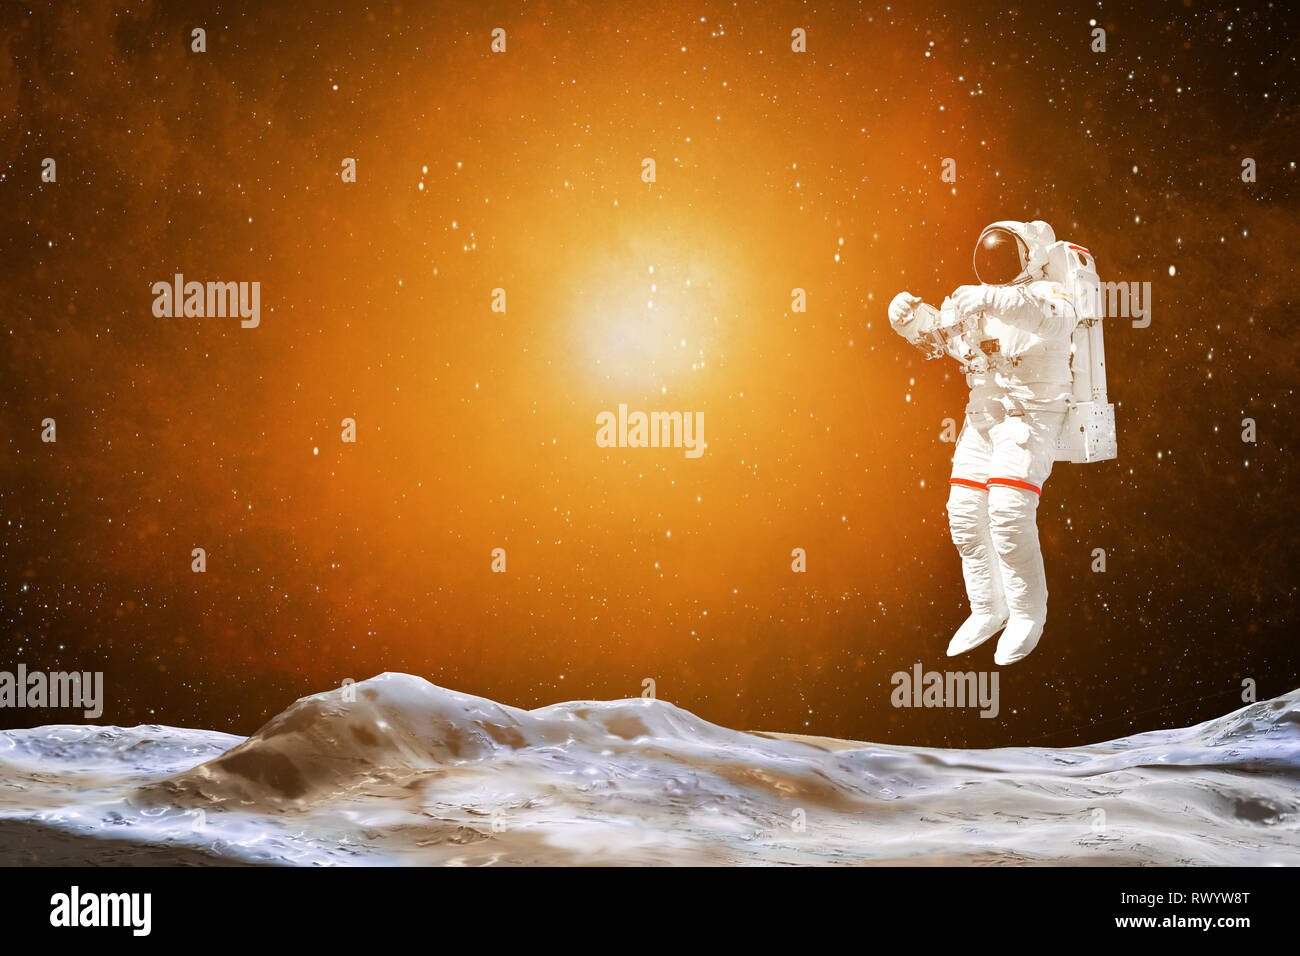 Spaceman in a spacesuit in outer space. Astronaut landing on a planet. Rising sun. Elements of this image furnished by NASA Stock Photo